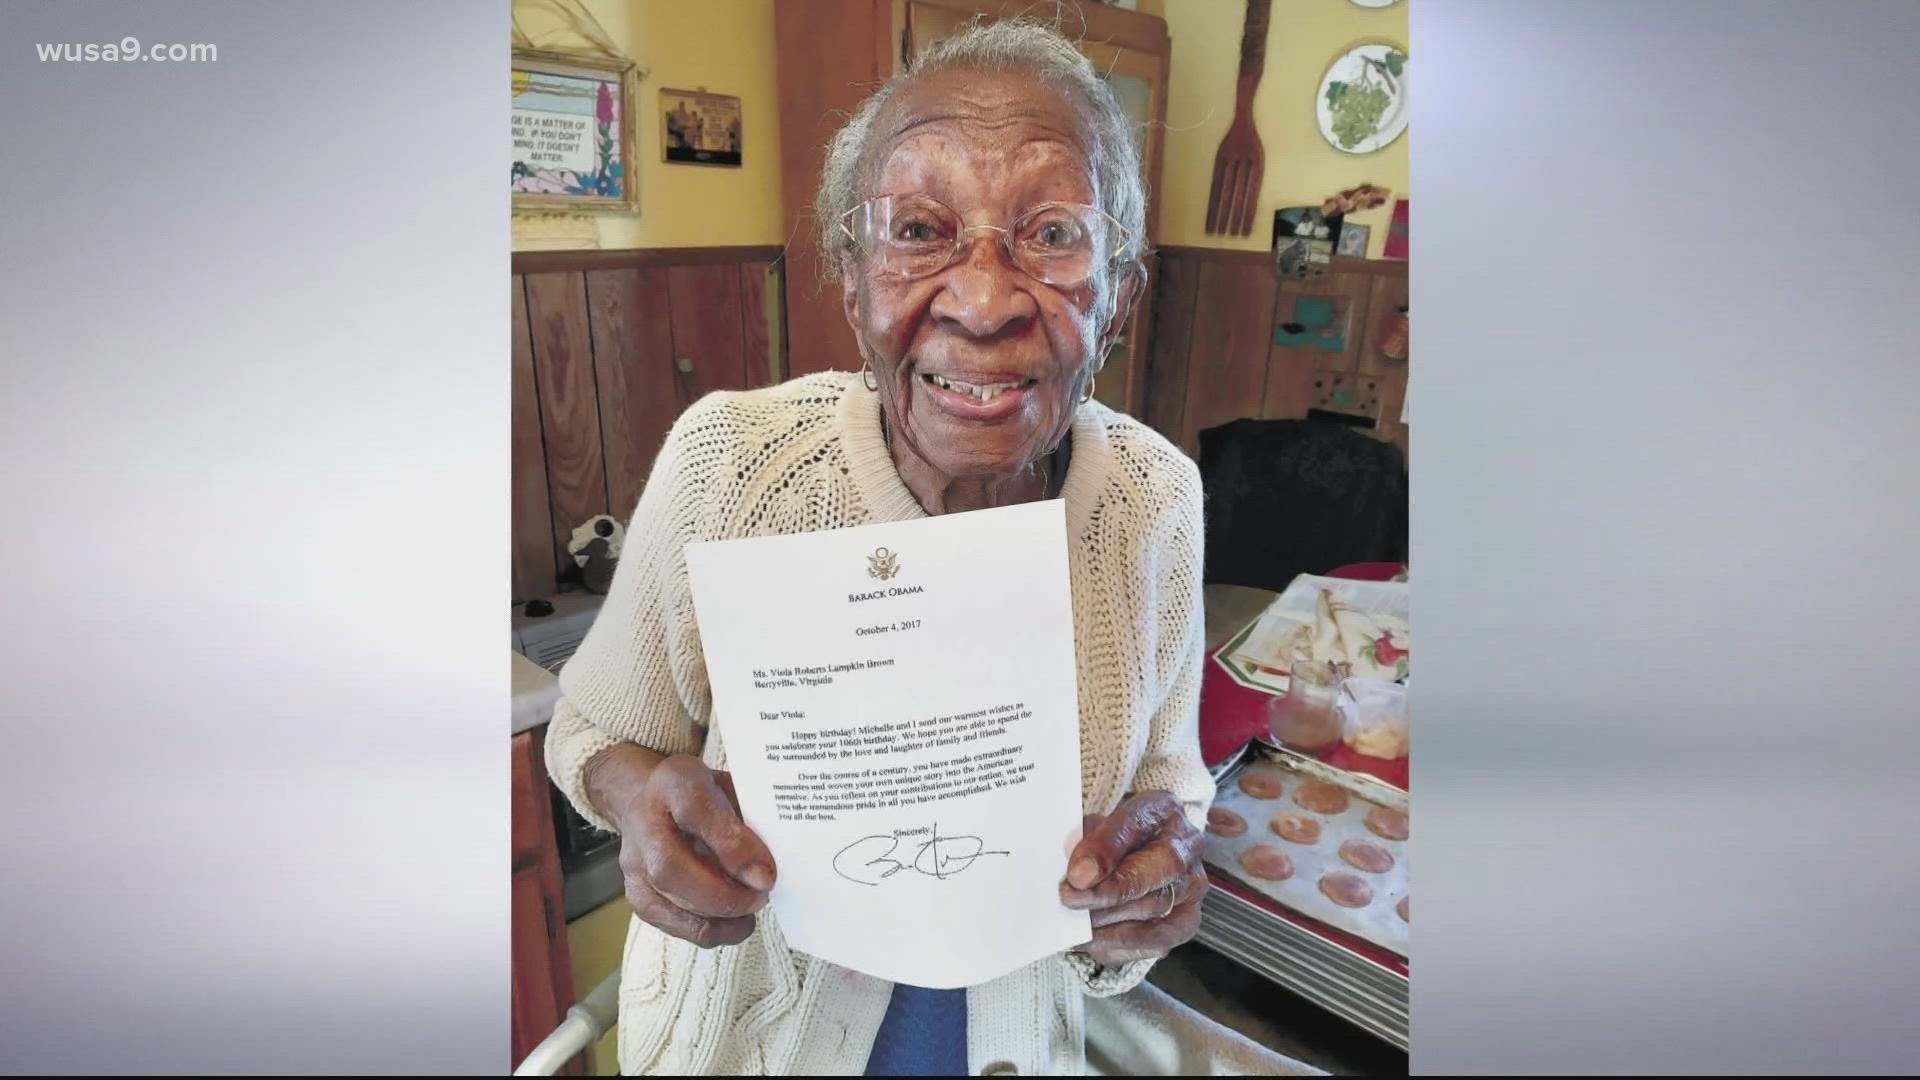 For her 106th birthday, Brown received a letter from Former President Barack Obama and Michelle Obama.